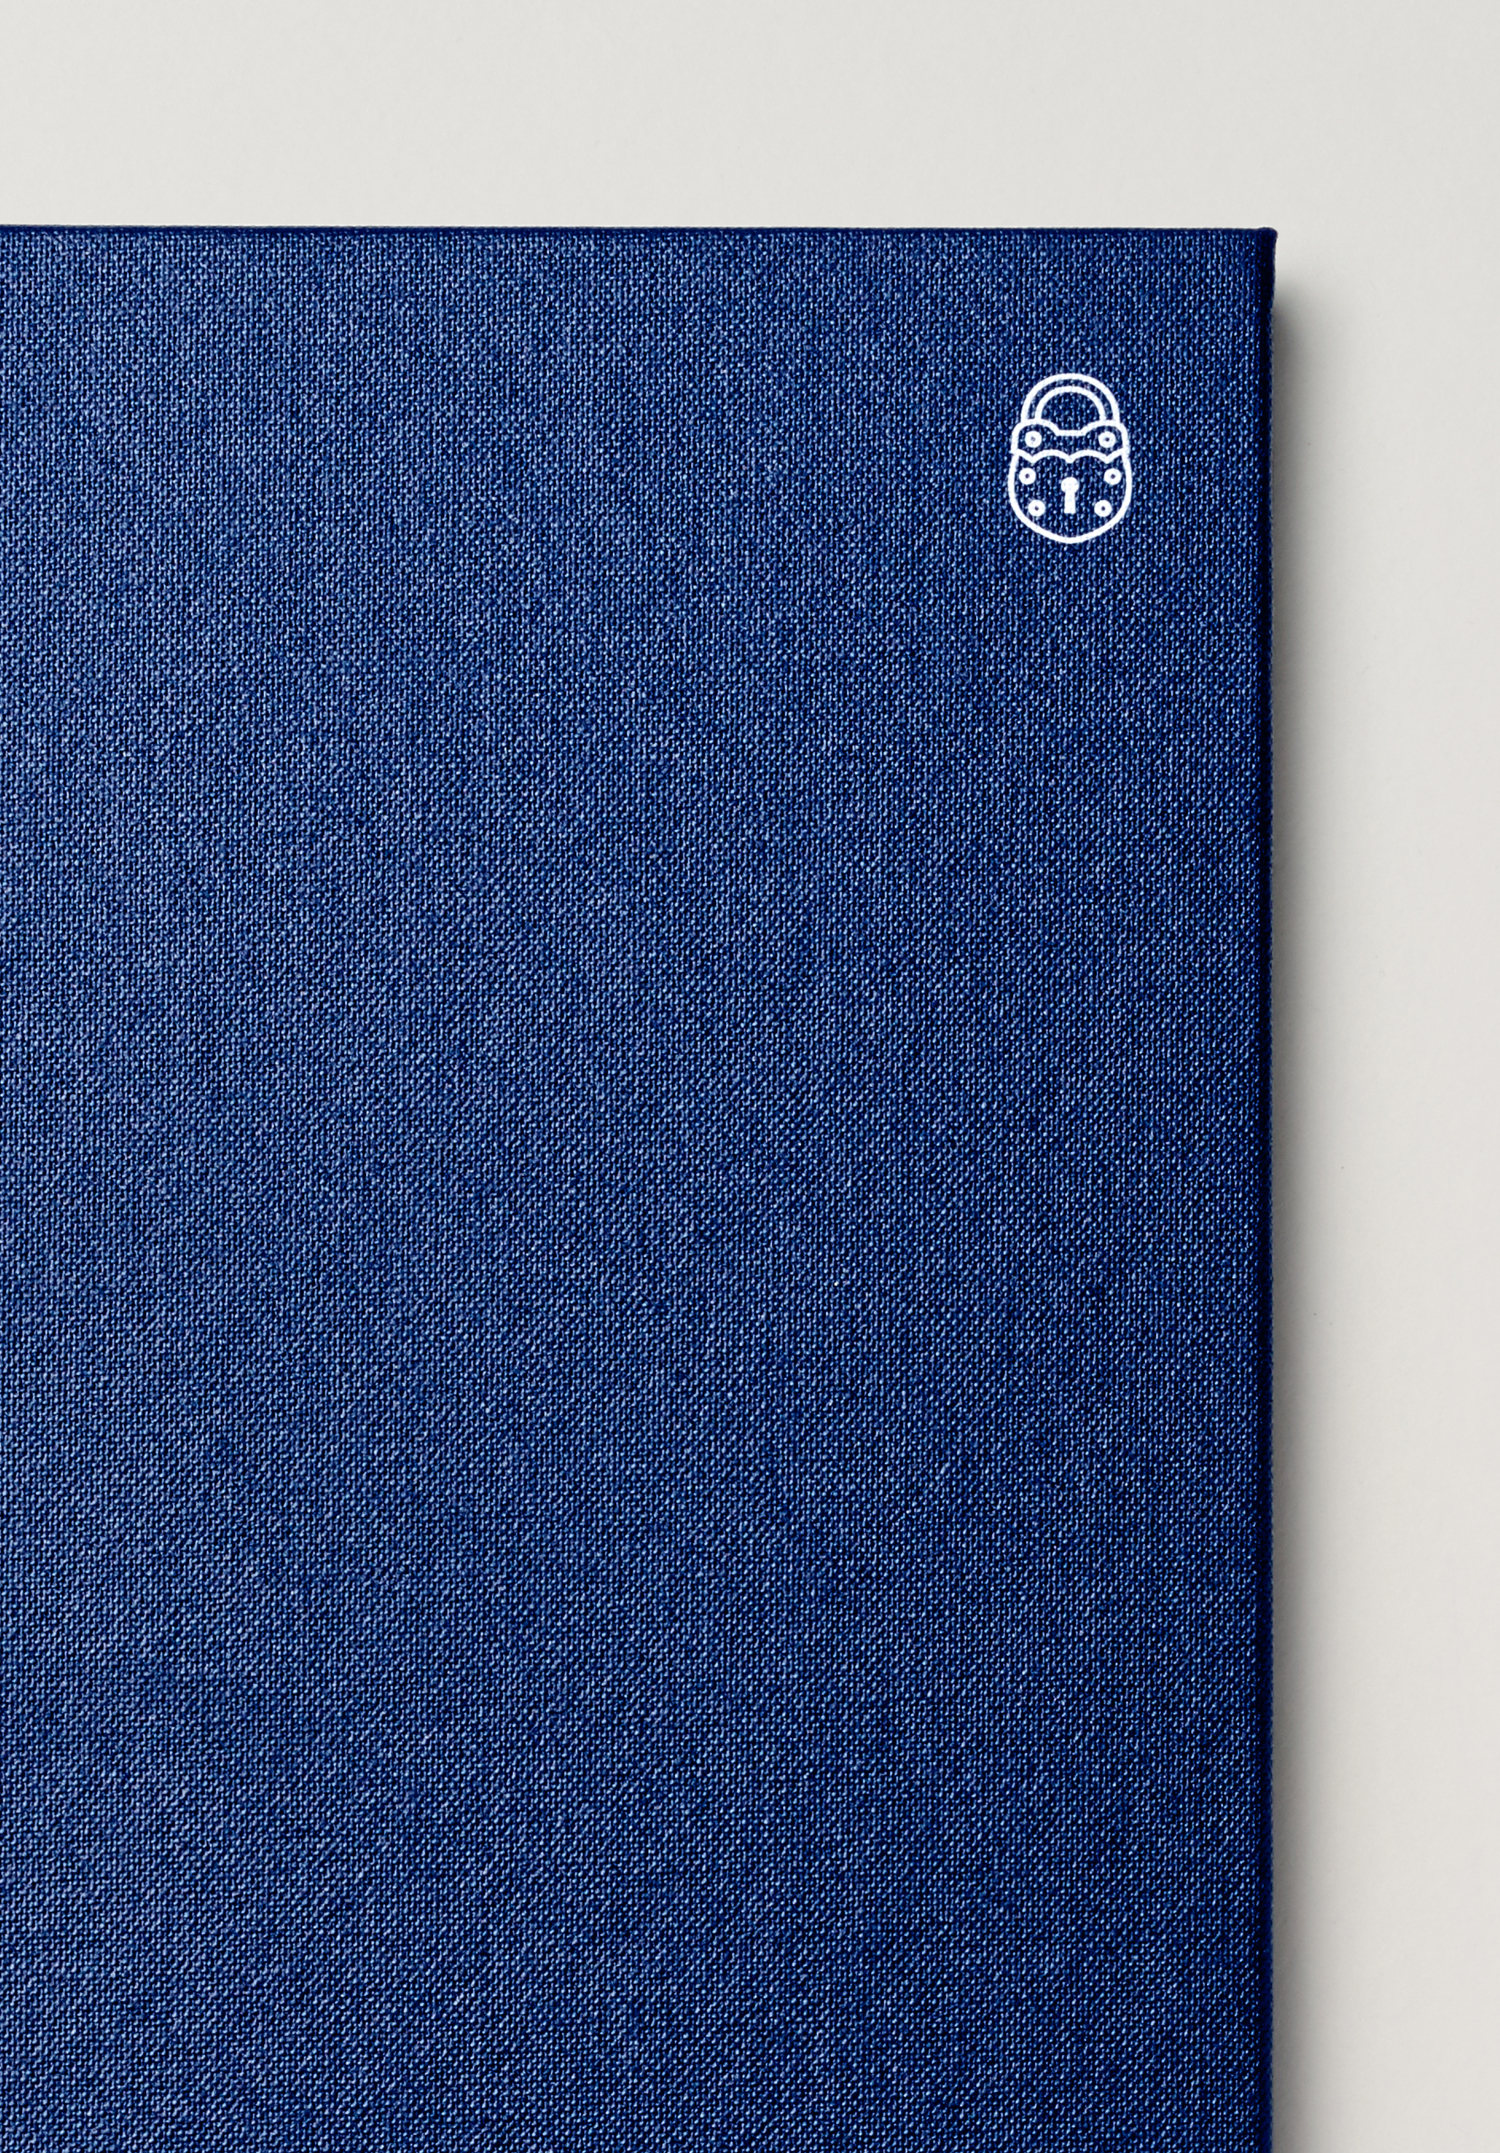 Brand identity and menu with blue fabric cover and white block foil designed by Swear Words for Melbourne-based French bistro Chez Olivier.